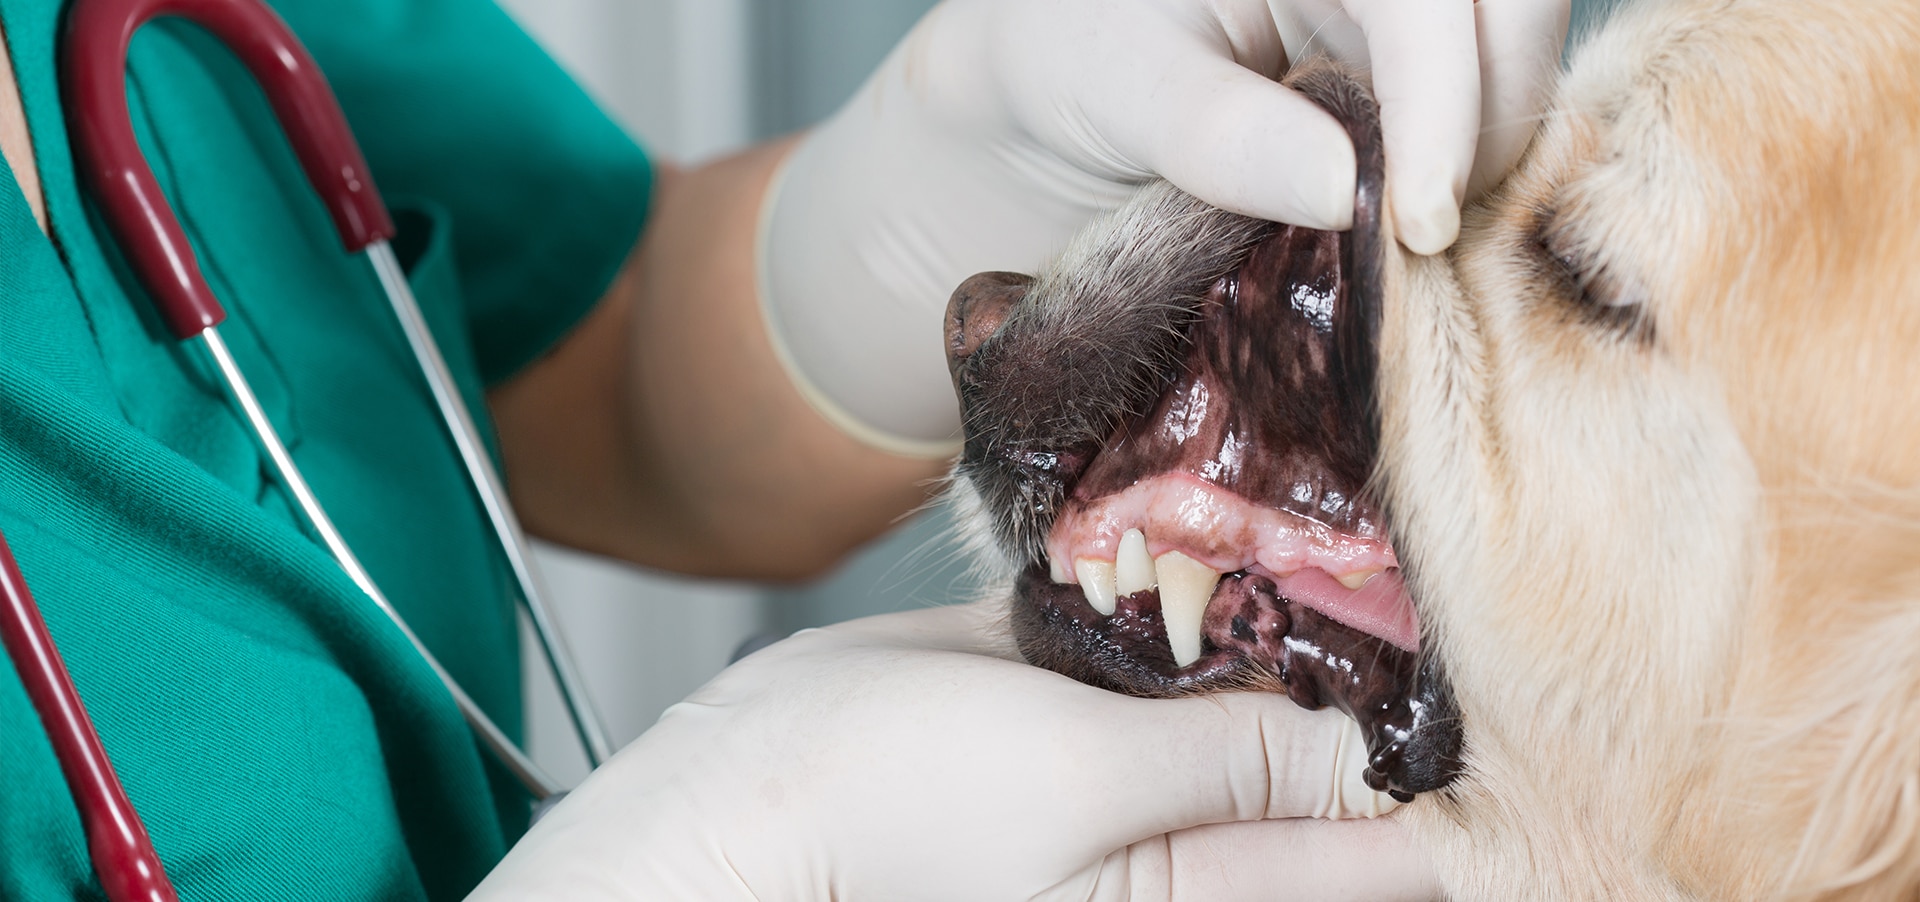 Common Dental Problems in Dogs | How To Care For Your Dog's Teeth